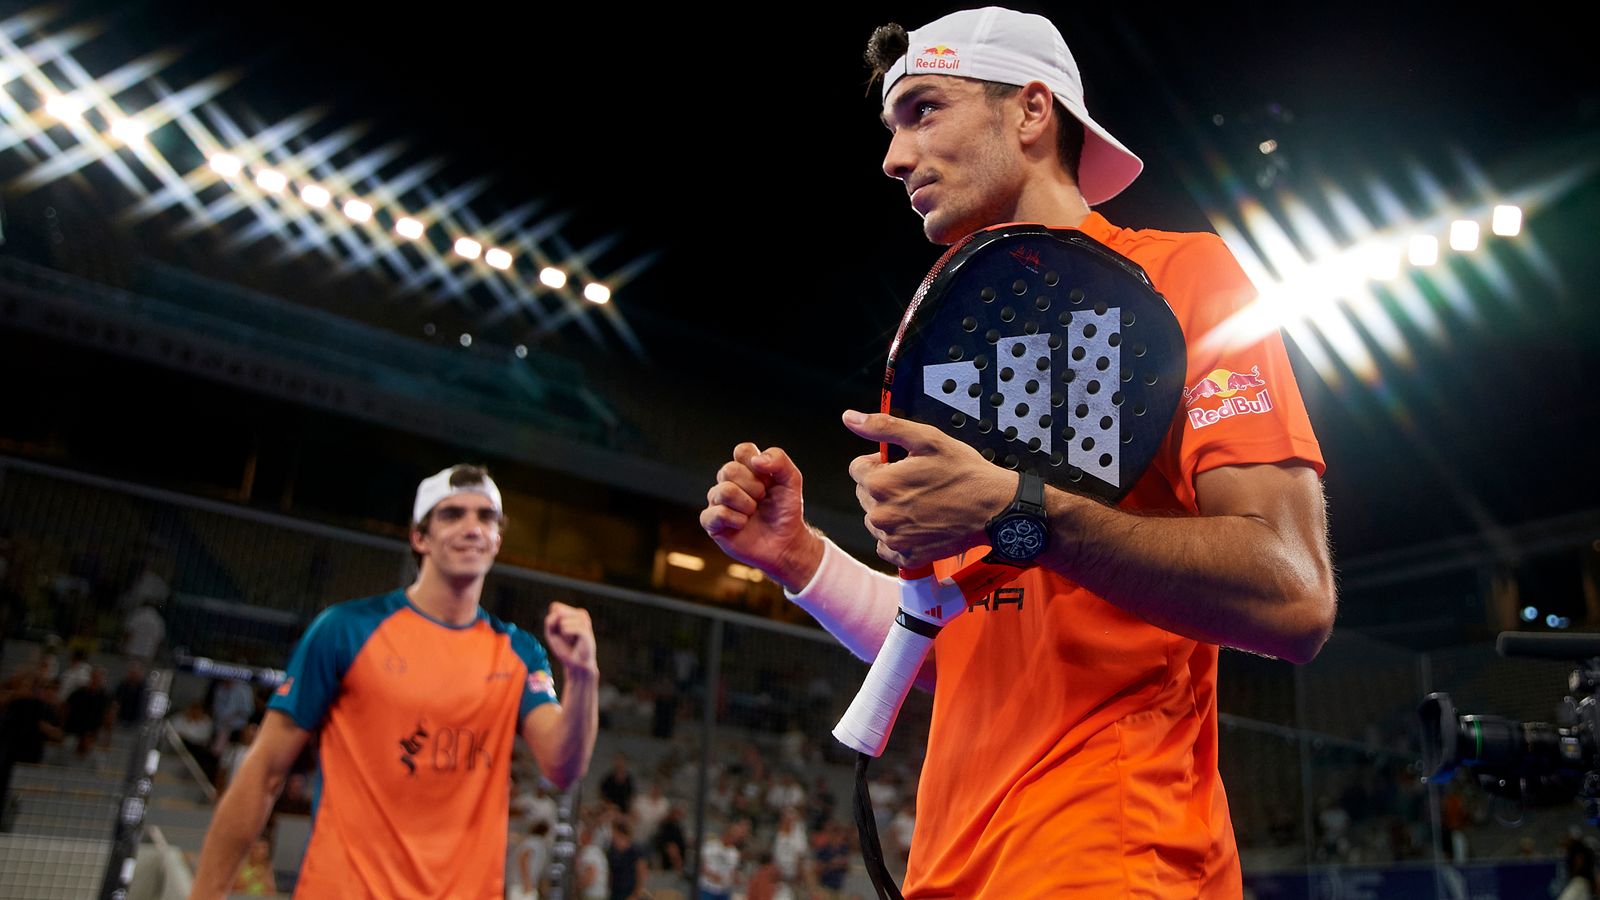 Padel underlines growing global stature with Red Bull tie-up